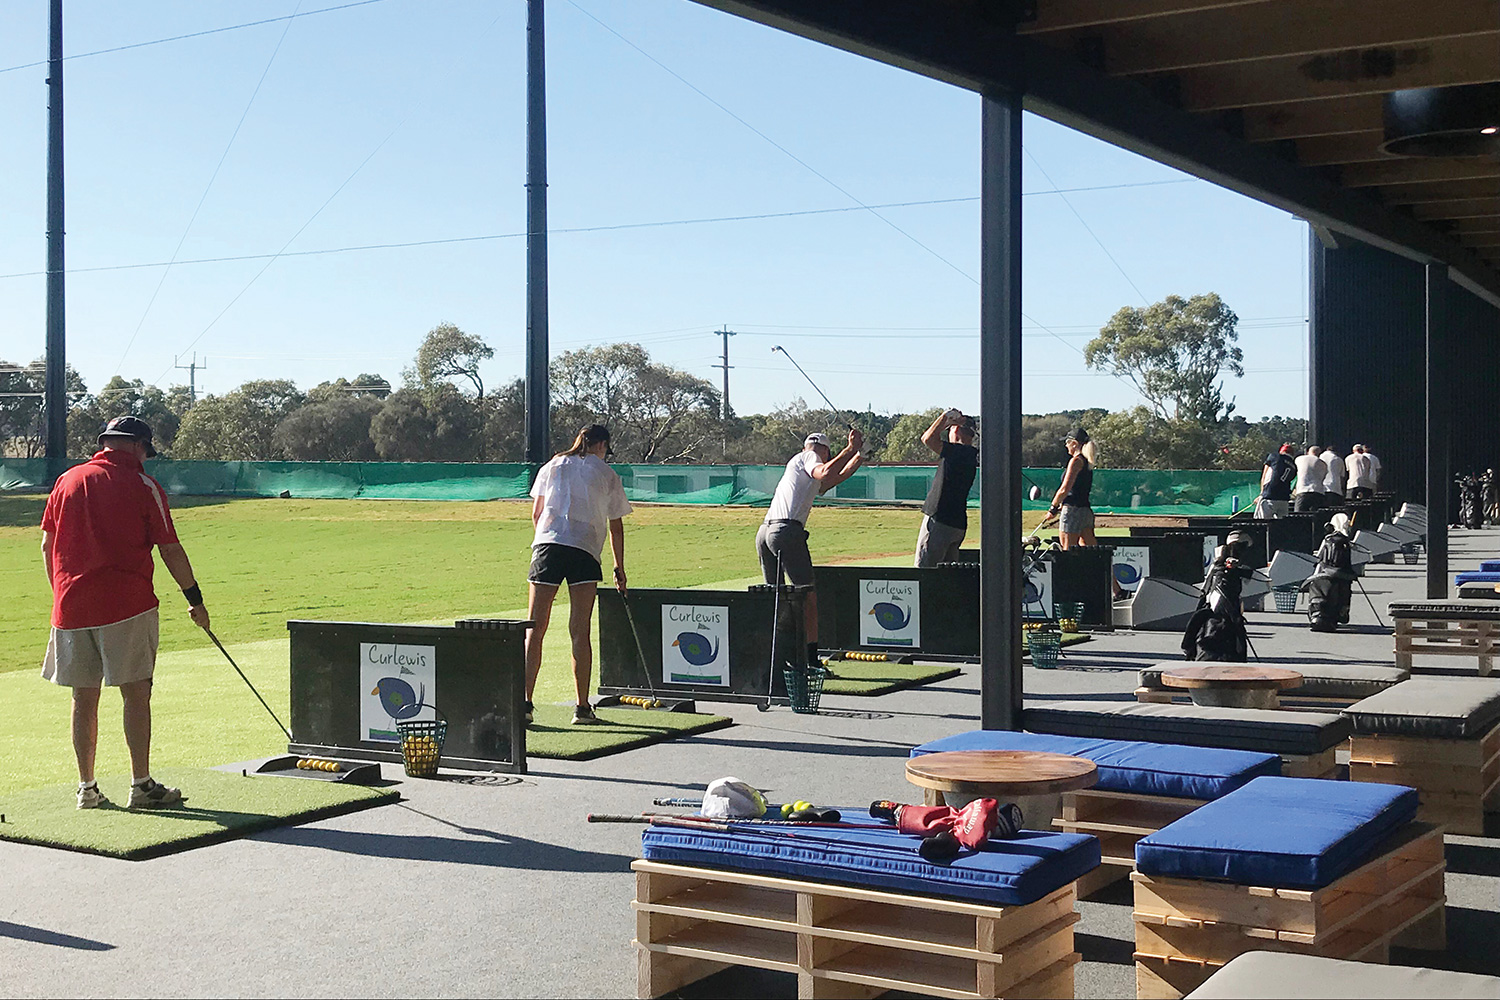 Whether for the casual or serious golfer, The Range is a comprehensive practice facility.